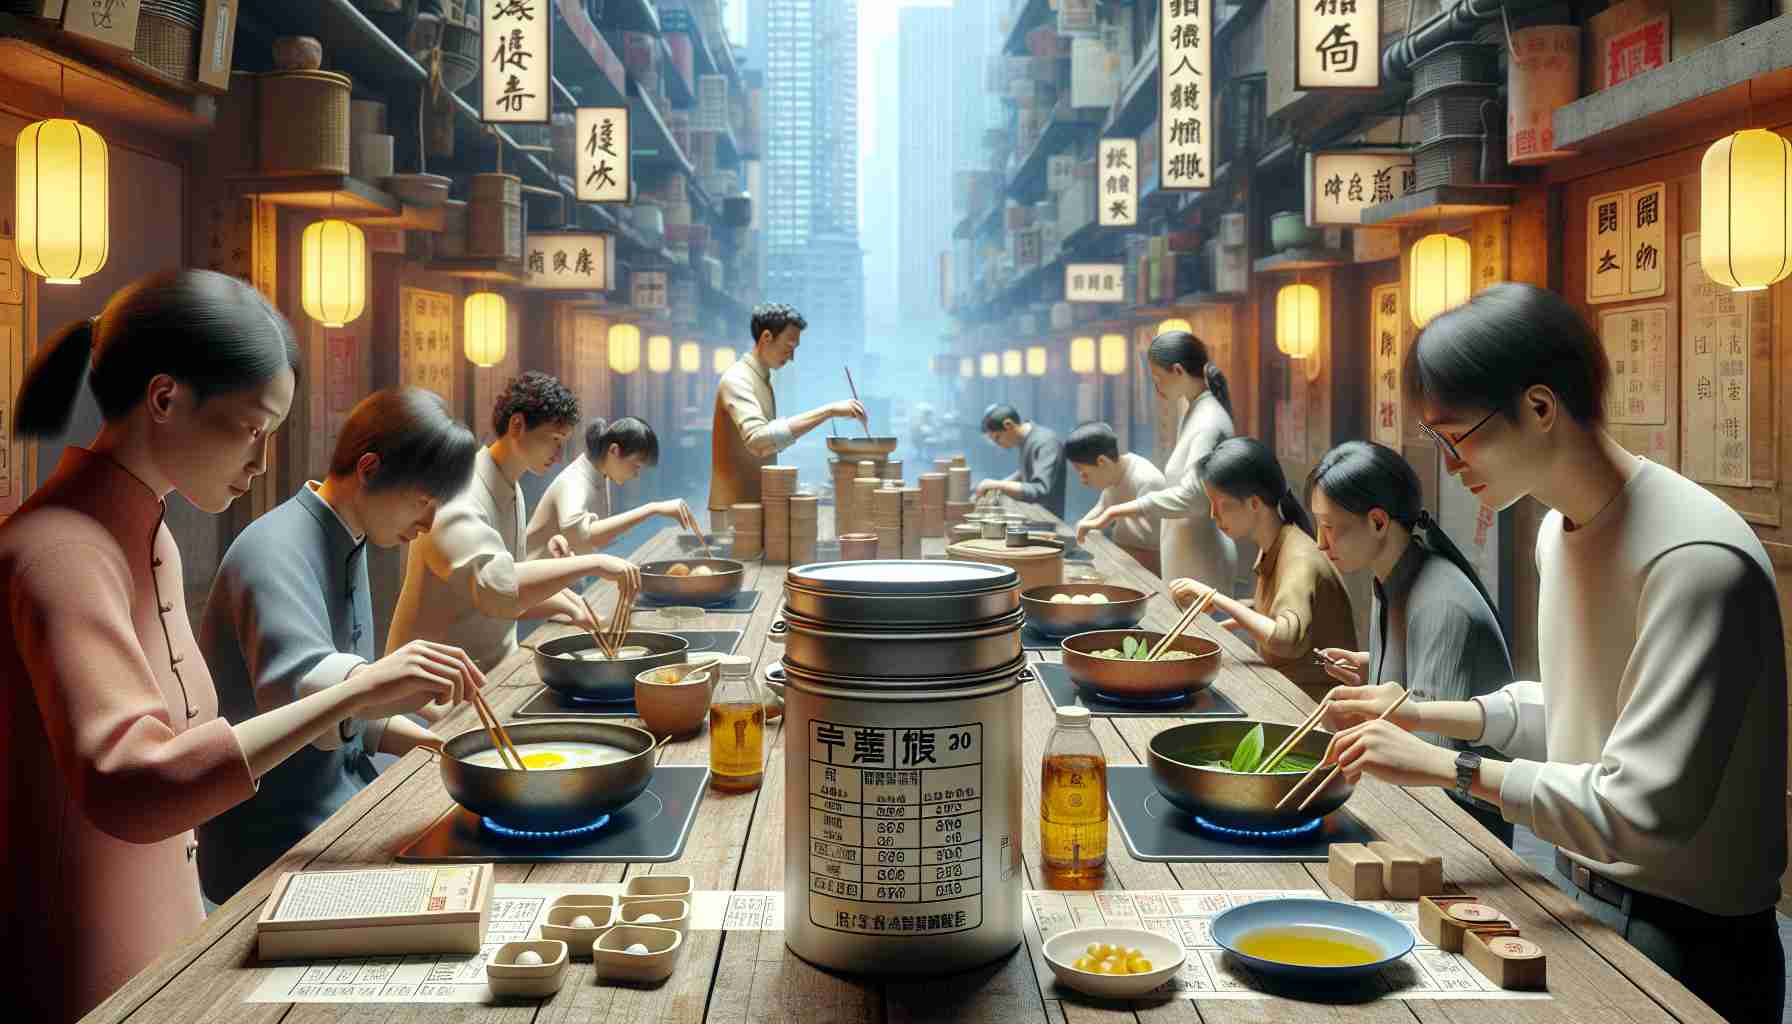 High definition and realistic image of a new trend gaining traction in China amidst concerns about the safety of cooking oil. The scene should show people exploring alternative cooking methods, possibly using traditional Chinese cookware and ingredients. Please include the elements of contemporary Chinese urban or suburban kitchens, highlight the safety precautions taken, such as labels on the oil containers indicating safety standards, and showcase the undulated sense of attentiveness reflected in the faces of different people, of diverse genders and descents.